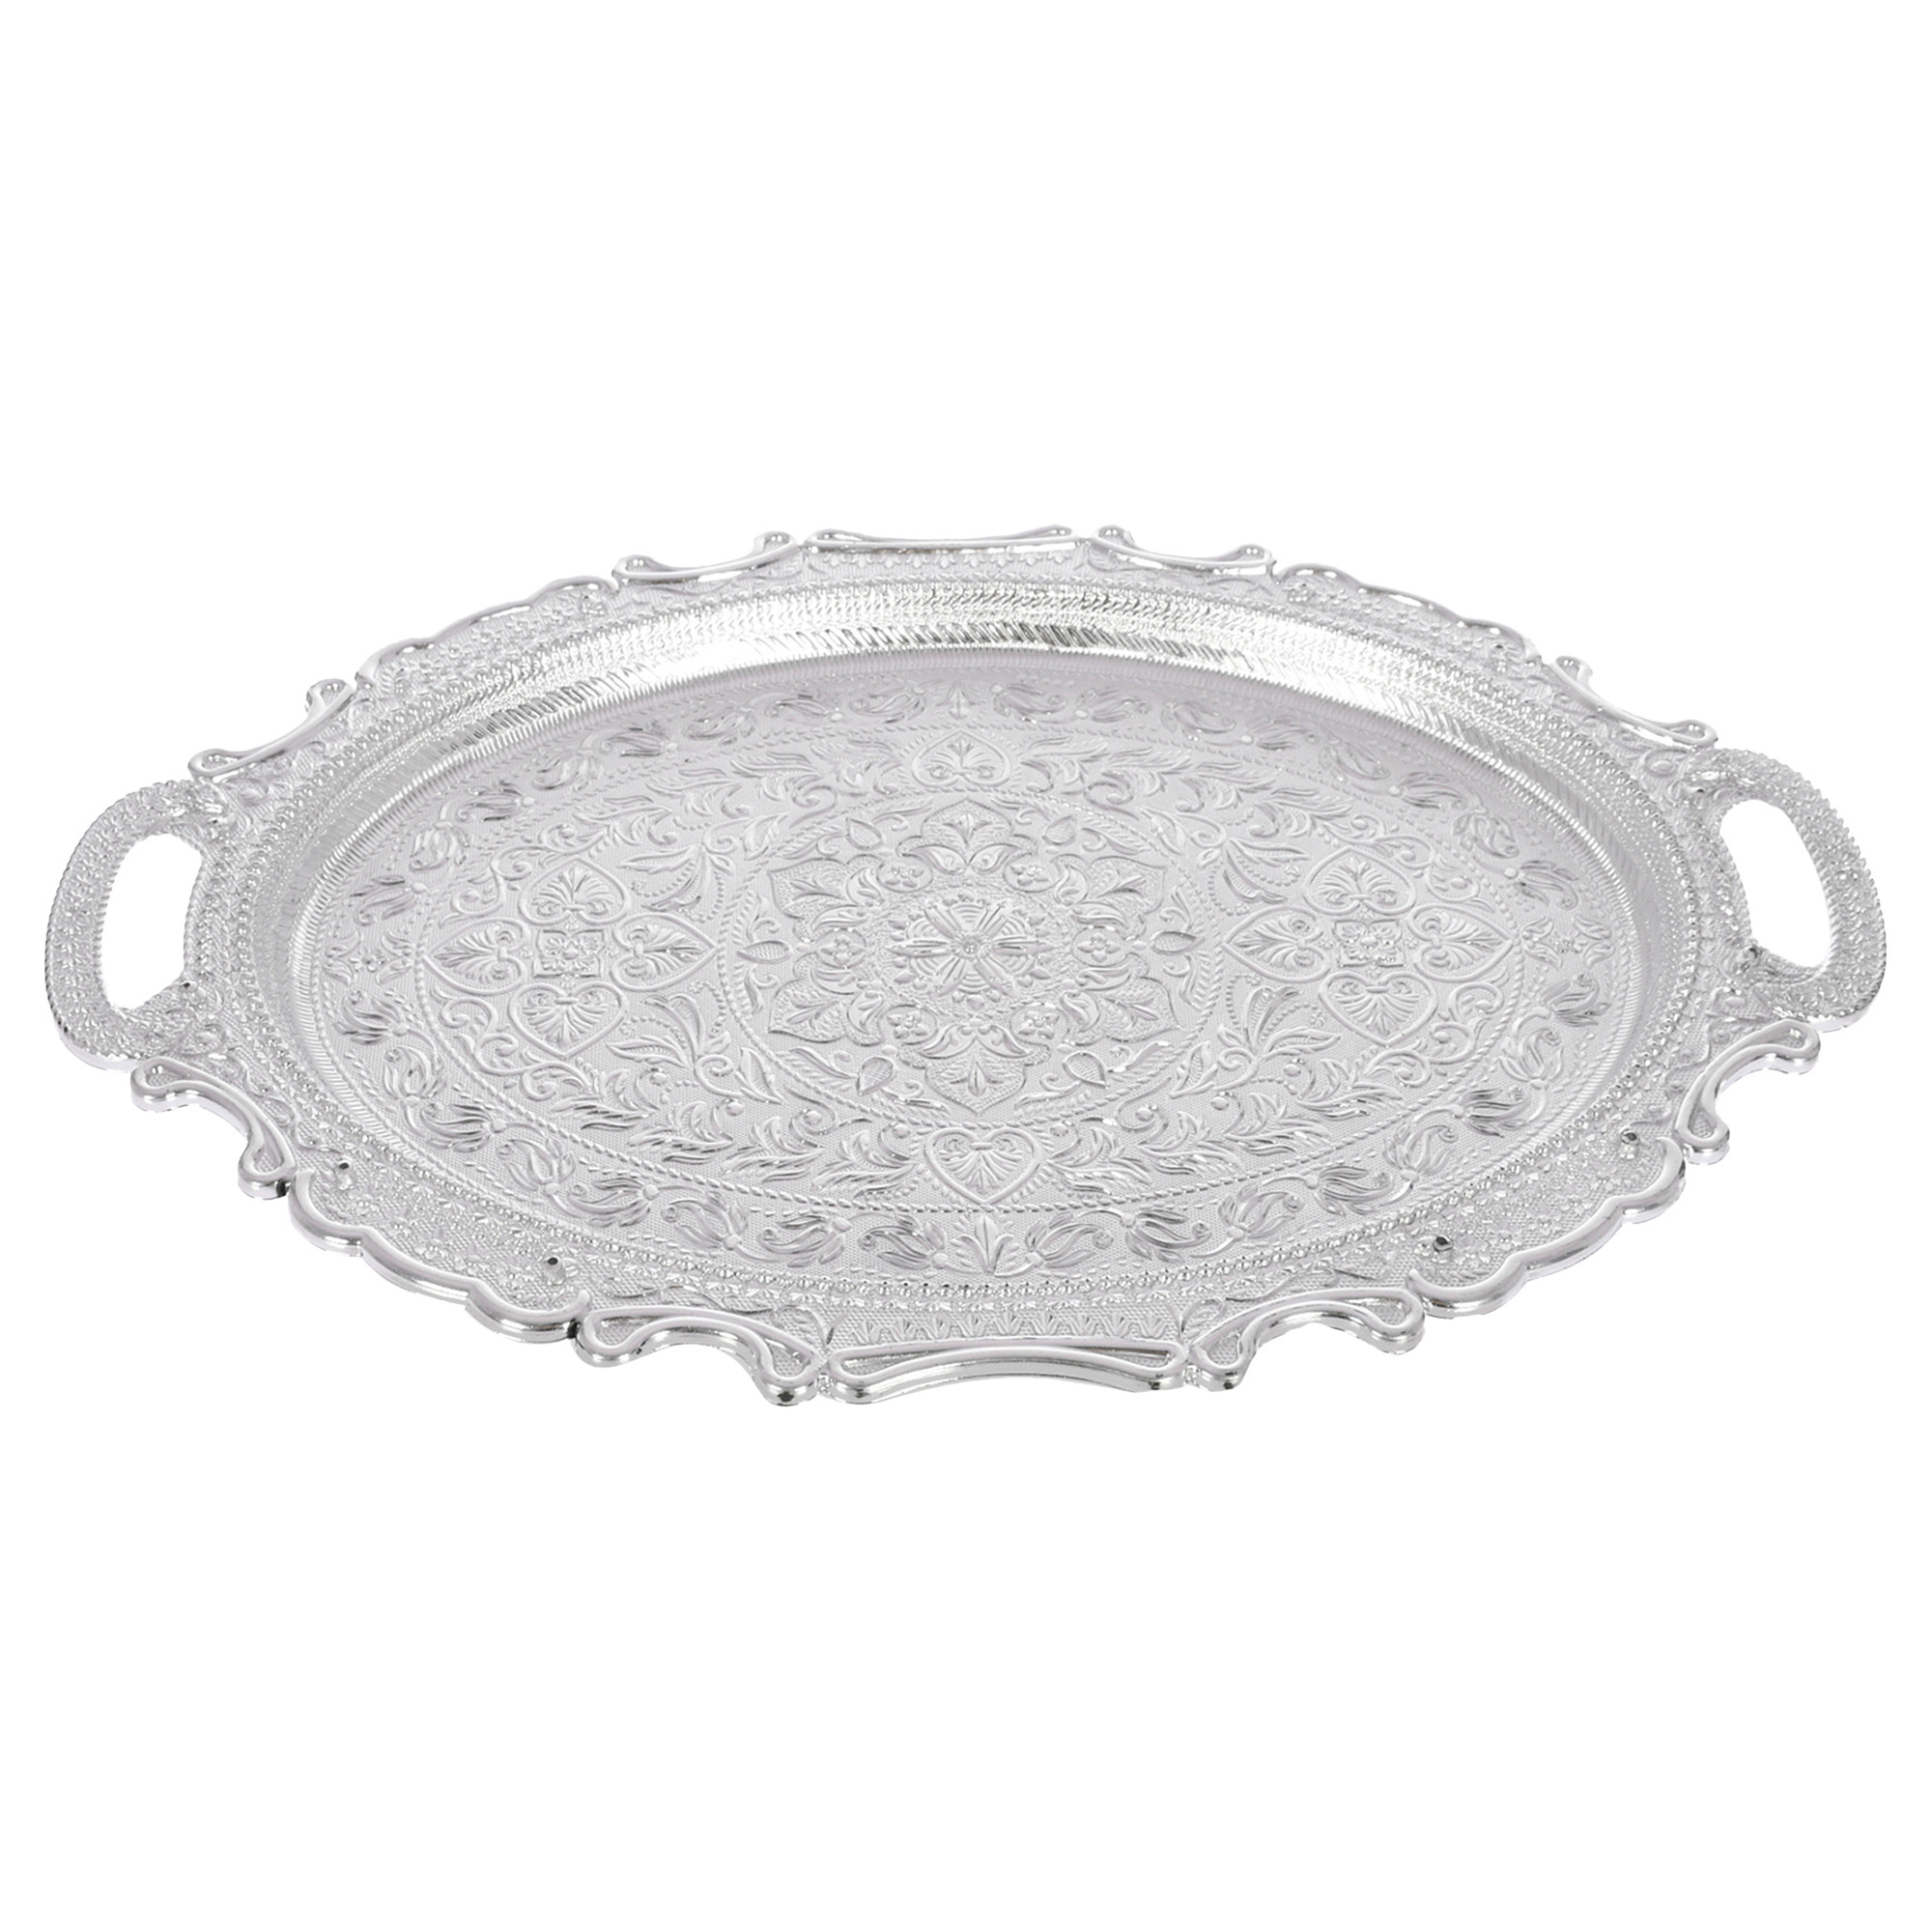 Kuber Industries Serving Tray | Serving Tray for Kitchen | Serving Tray for Guest | Serving Tray with Handles | Dining Table Tray | Serving Dish Tray | Serving Platter | Silver